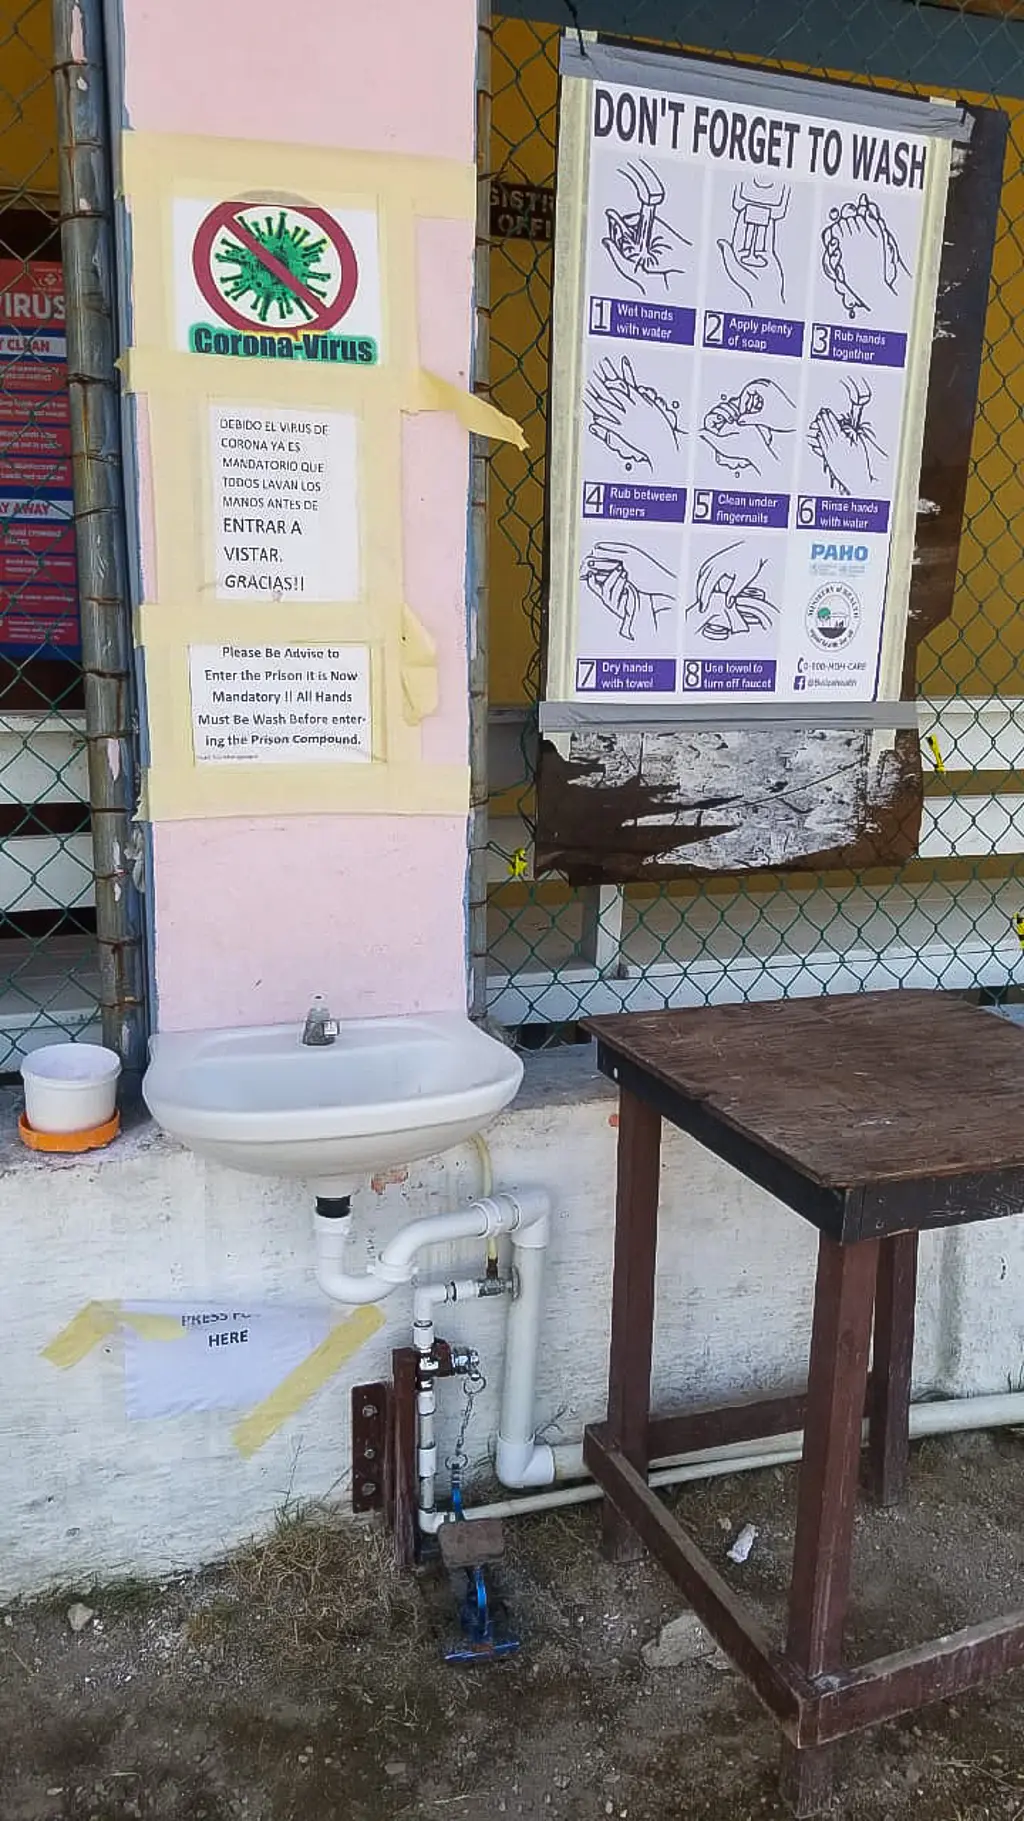 A sign at the Belize Central Prison reminds visitors to wash their hands to help prevent COVID-19.